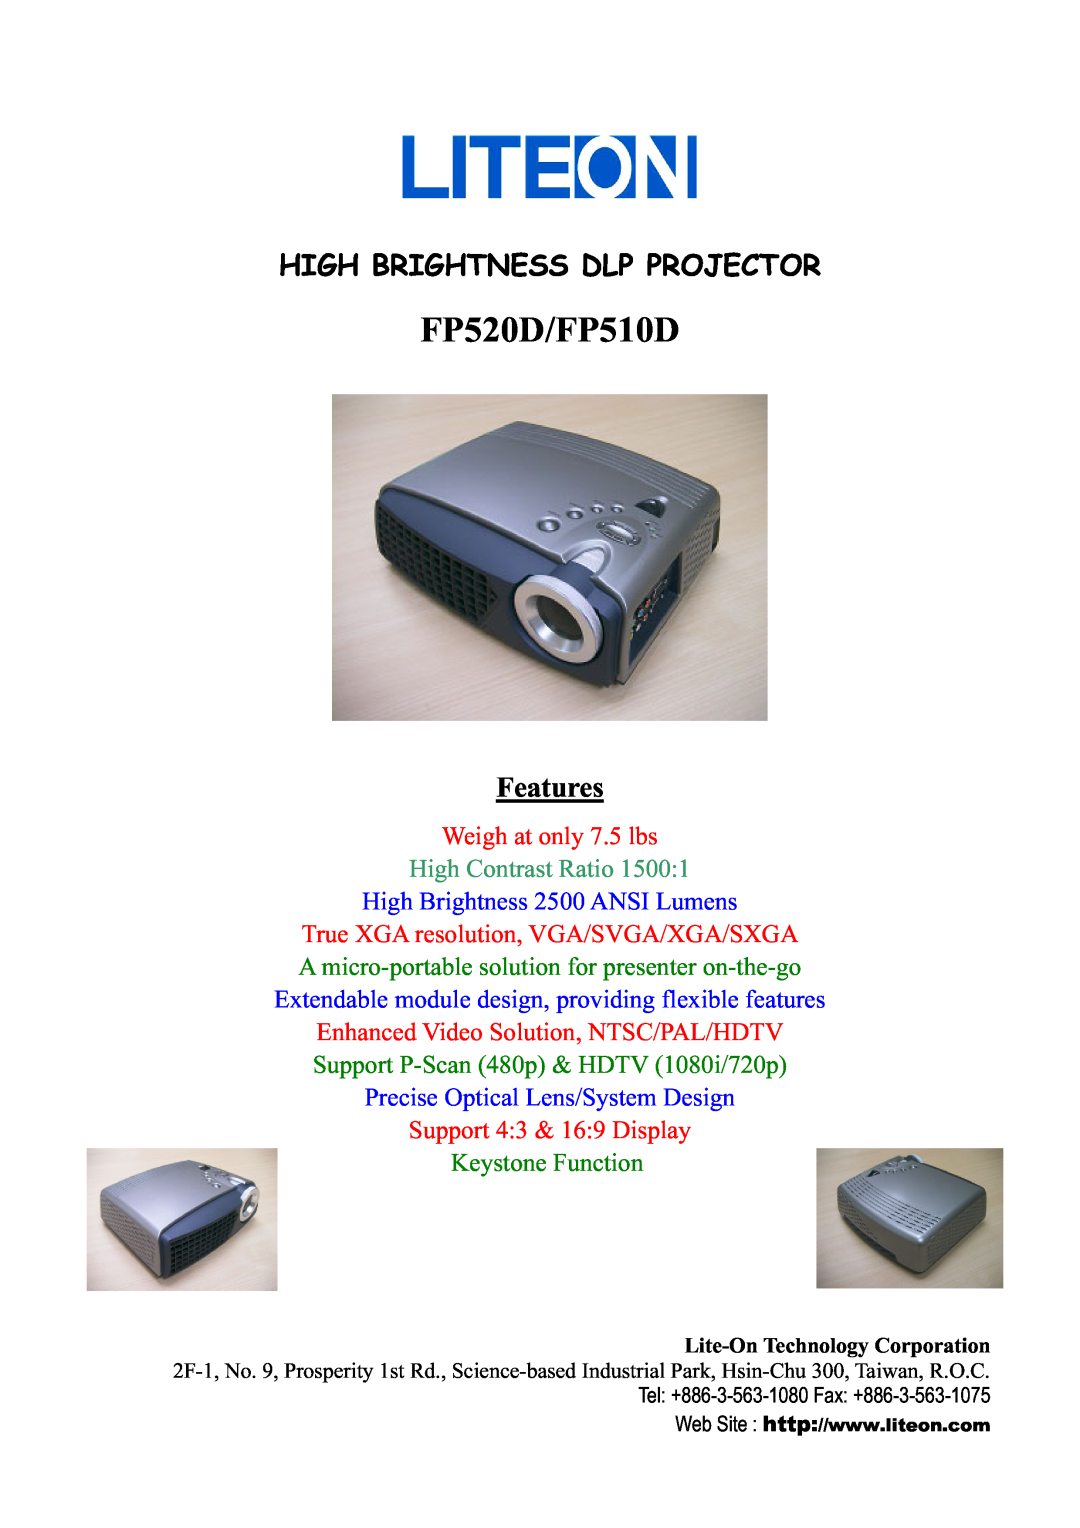 Lite-On manual FP520D/FP510D, High Brightness Dlp Projector, Features, Weigh at only 7.5 lbs, High Contrast Ratio 